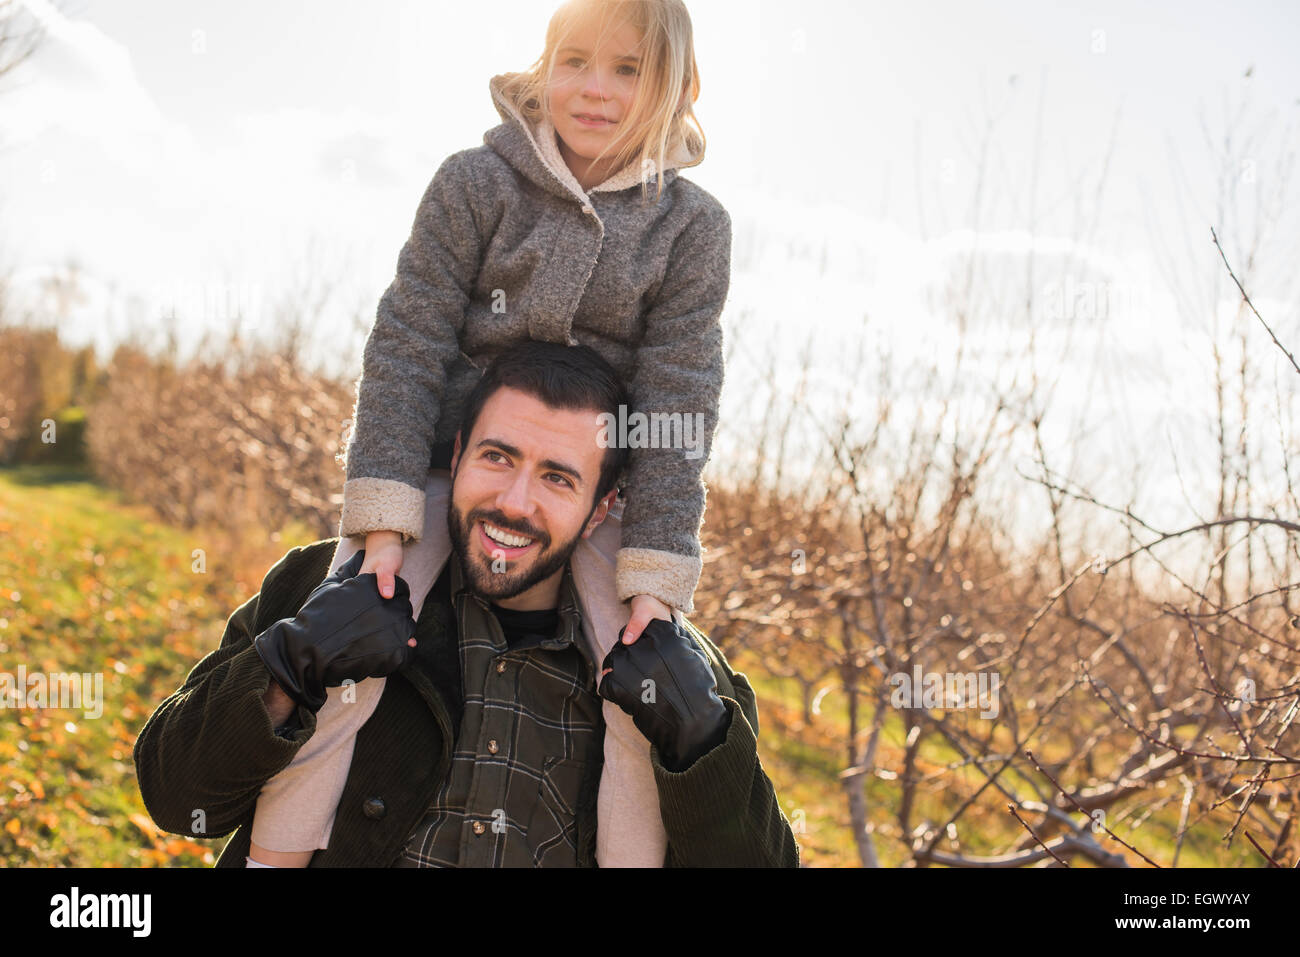 A man giving a child a ride on his shoulders. Stock Photo